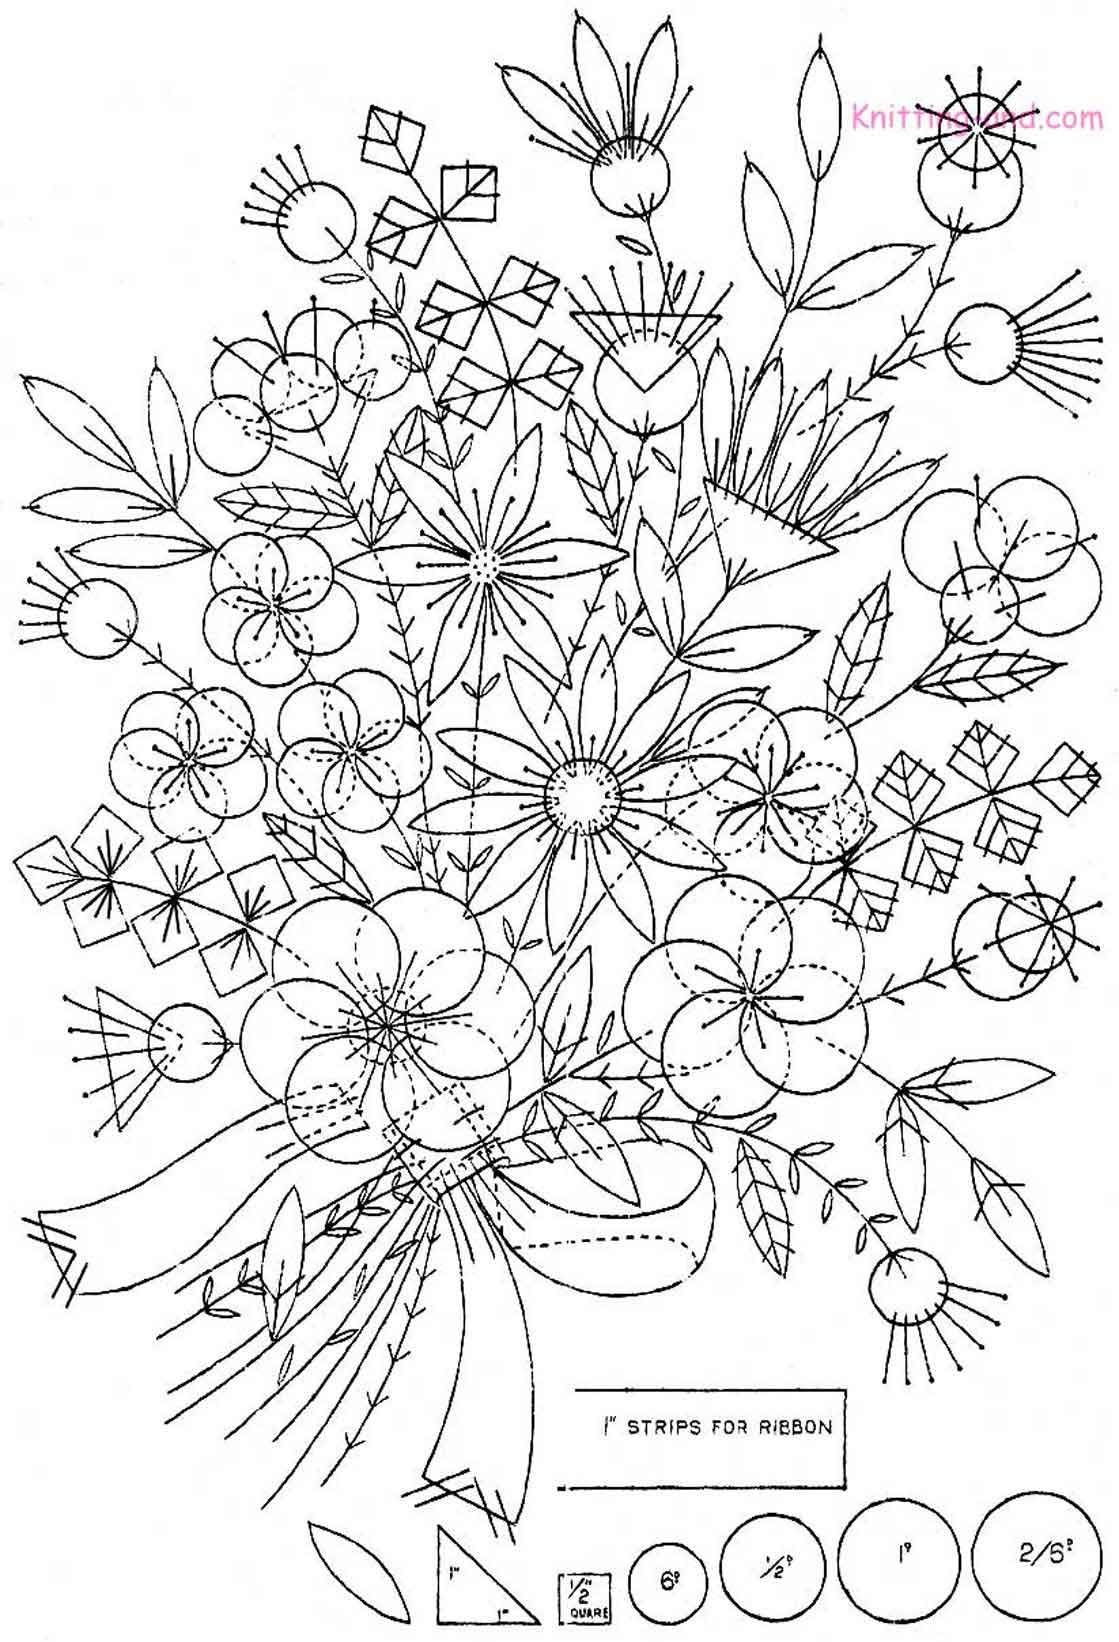 Free Printable Hand Embroidery Designs | Free Embroidery Pattern - Free Printable Embroidery Patterns